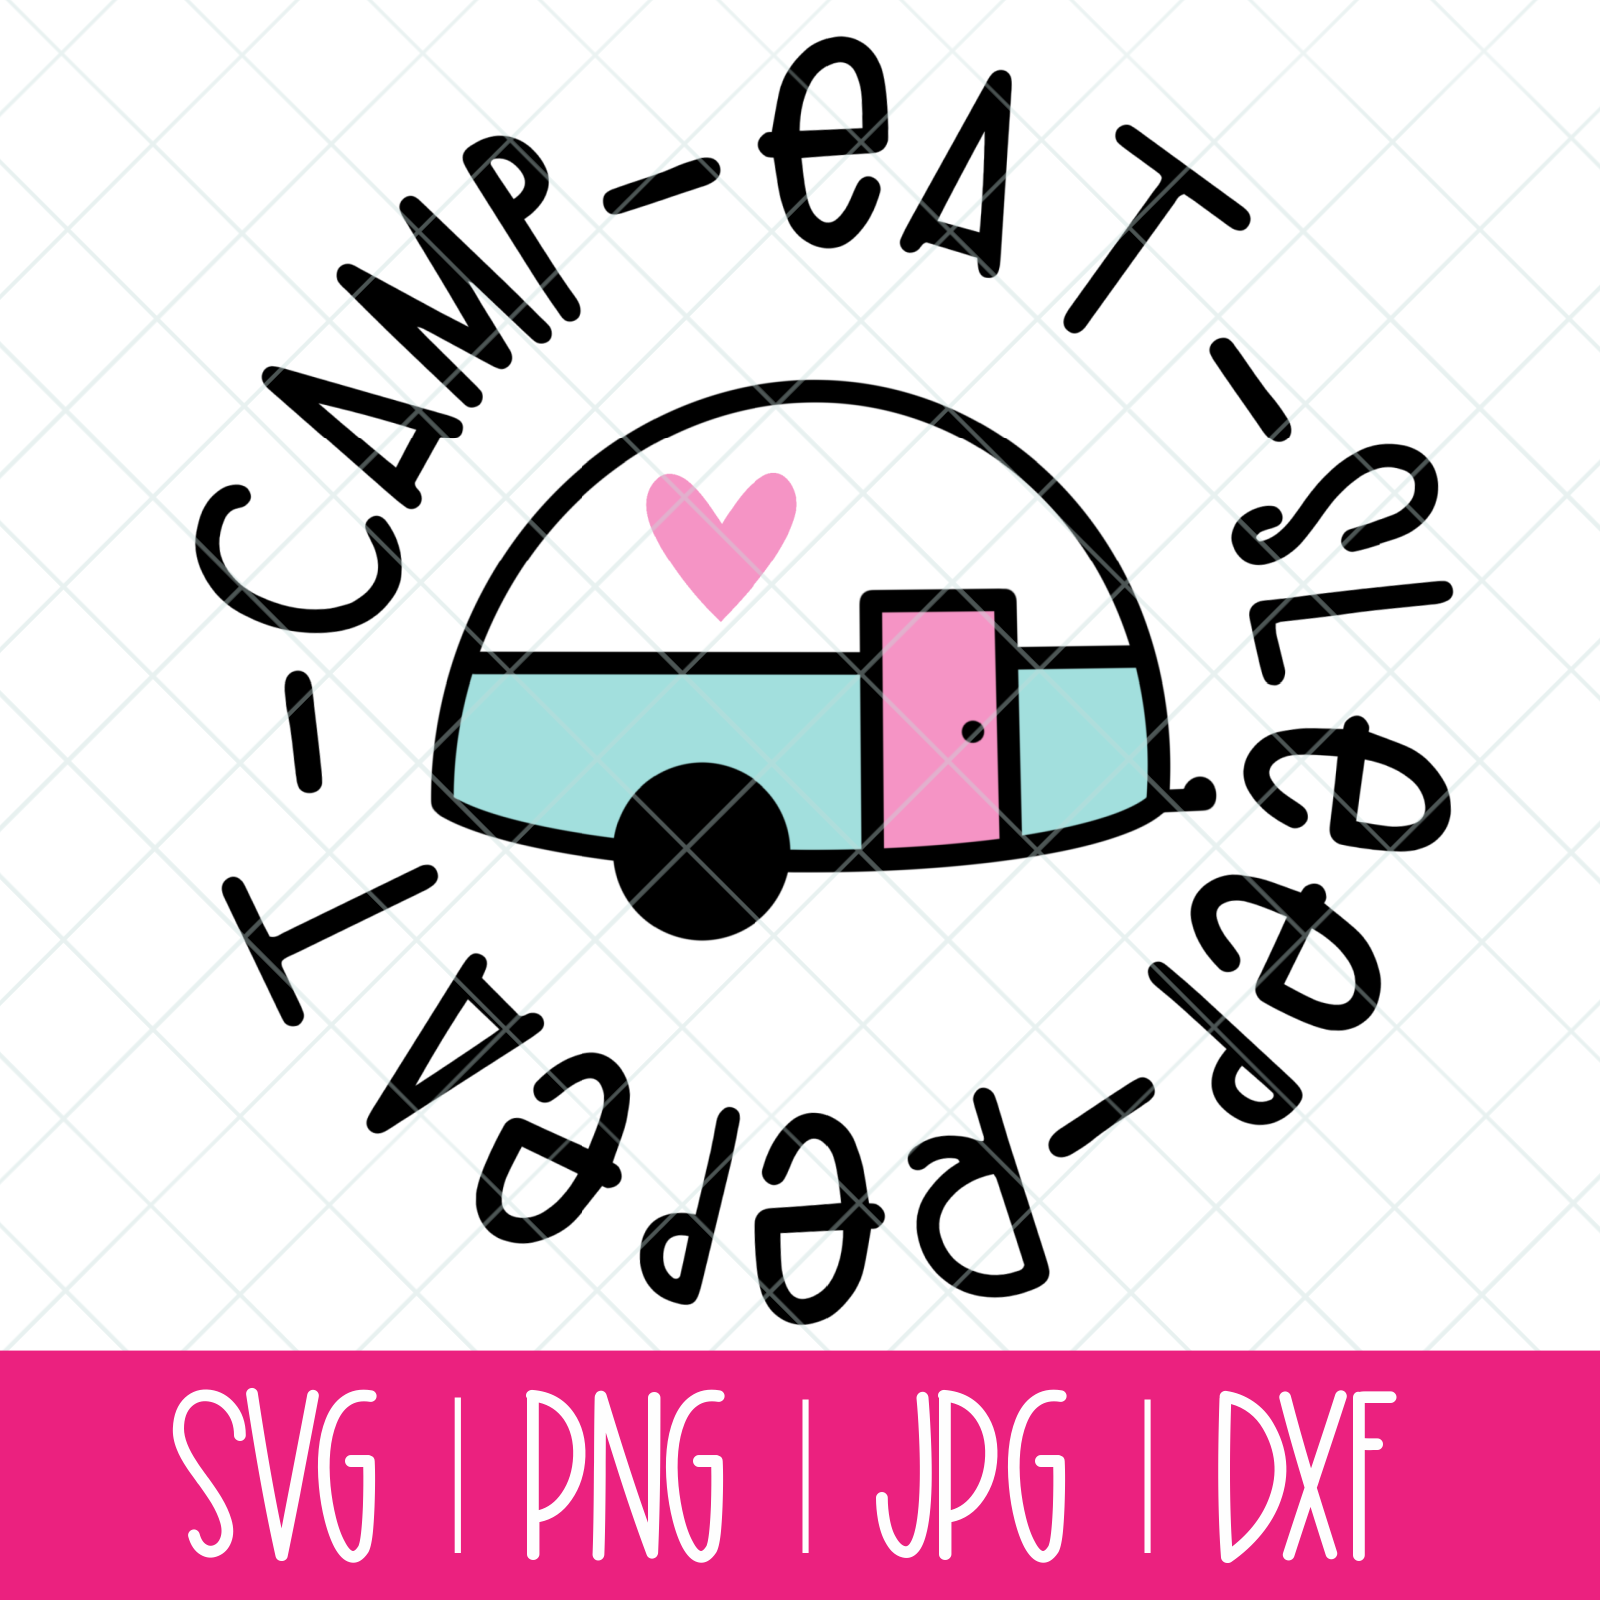 Download Clip Art Eat Sleep Camp Svg Silhouette File Svg File Svg Designs Commerical Use File For Silhouette Circut Files Svg Files Silhouette Files Art Collectibles